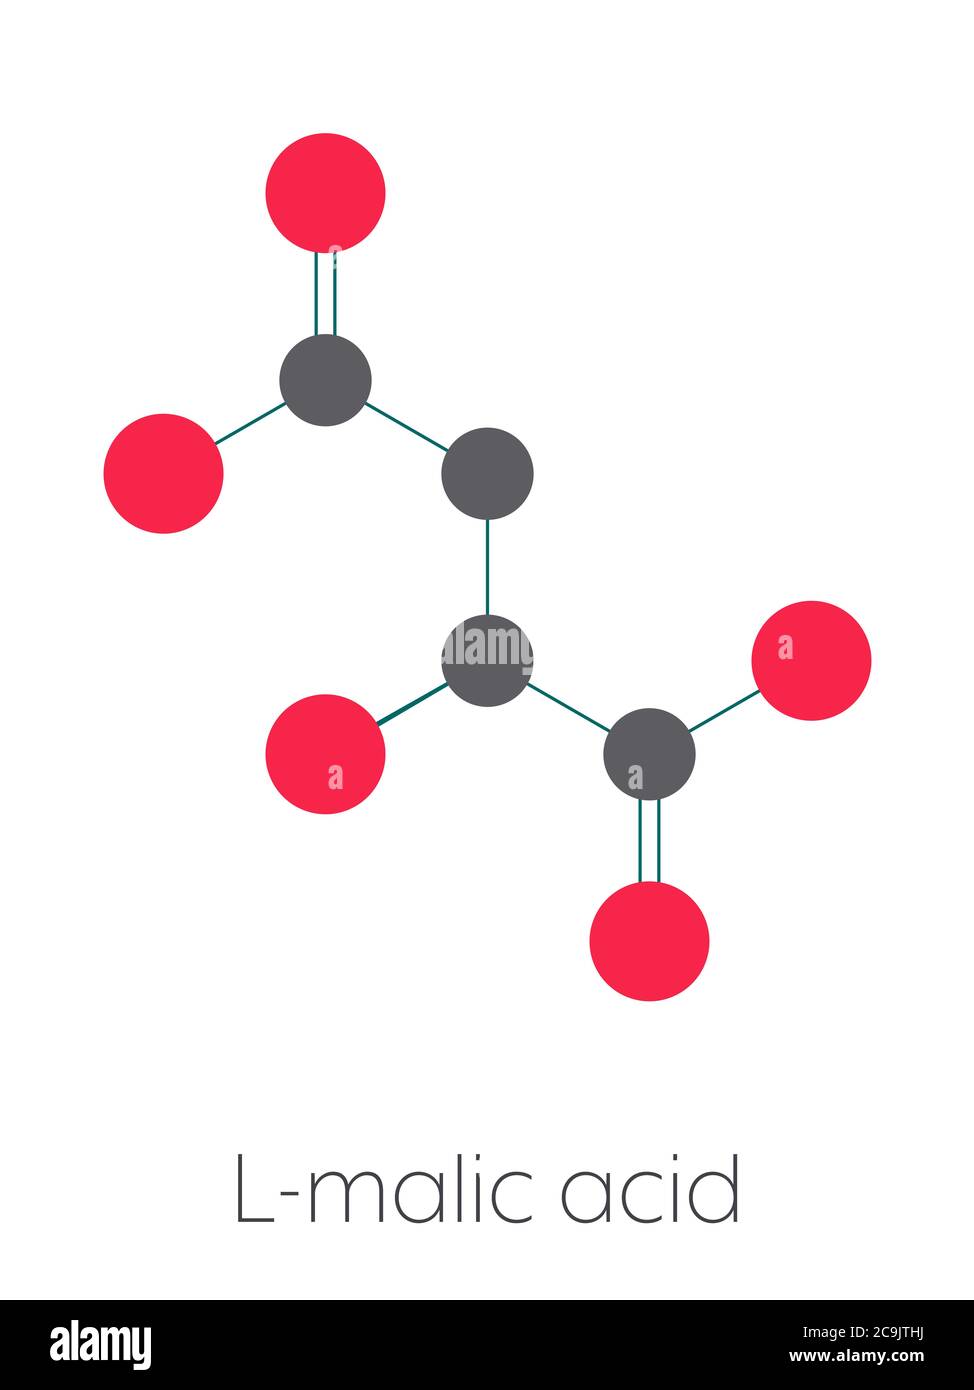 Malic acid fruit acid molecule. Present in apples, grapes, rhubarb, etc and contributes to the sour taste of these. Stylized skeletal formula (chemica Stock Photo